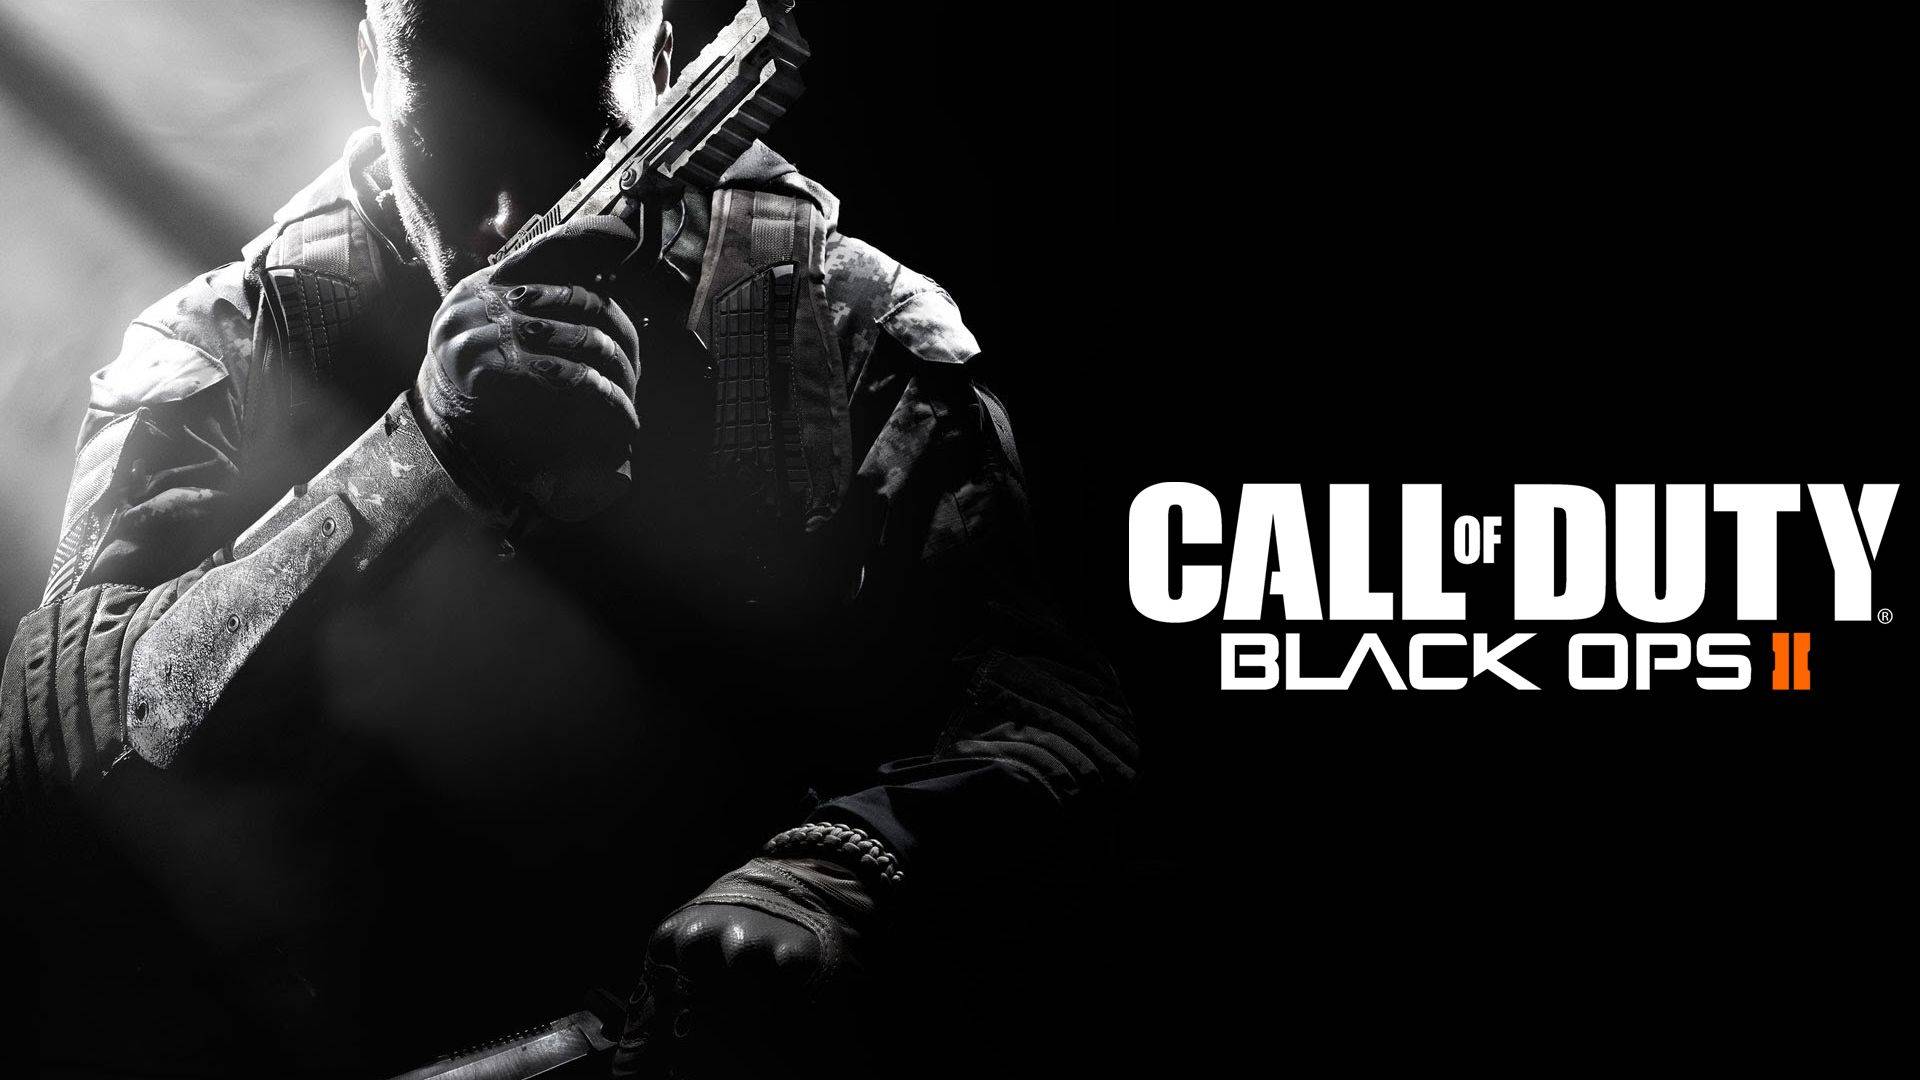 Call of Duty  Black ops 2 !!!